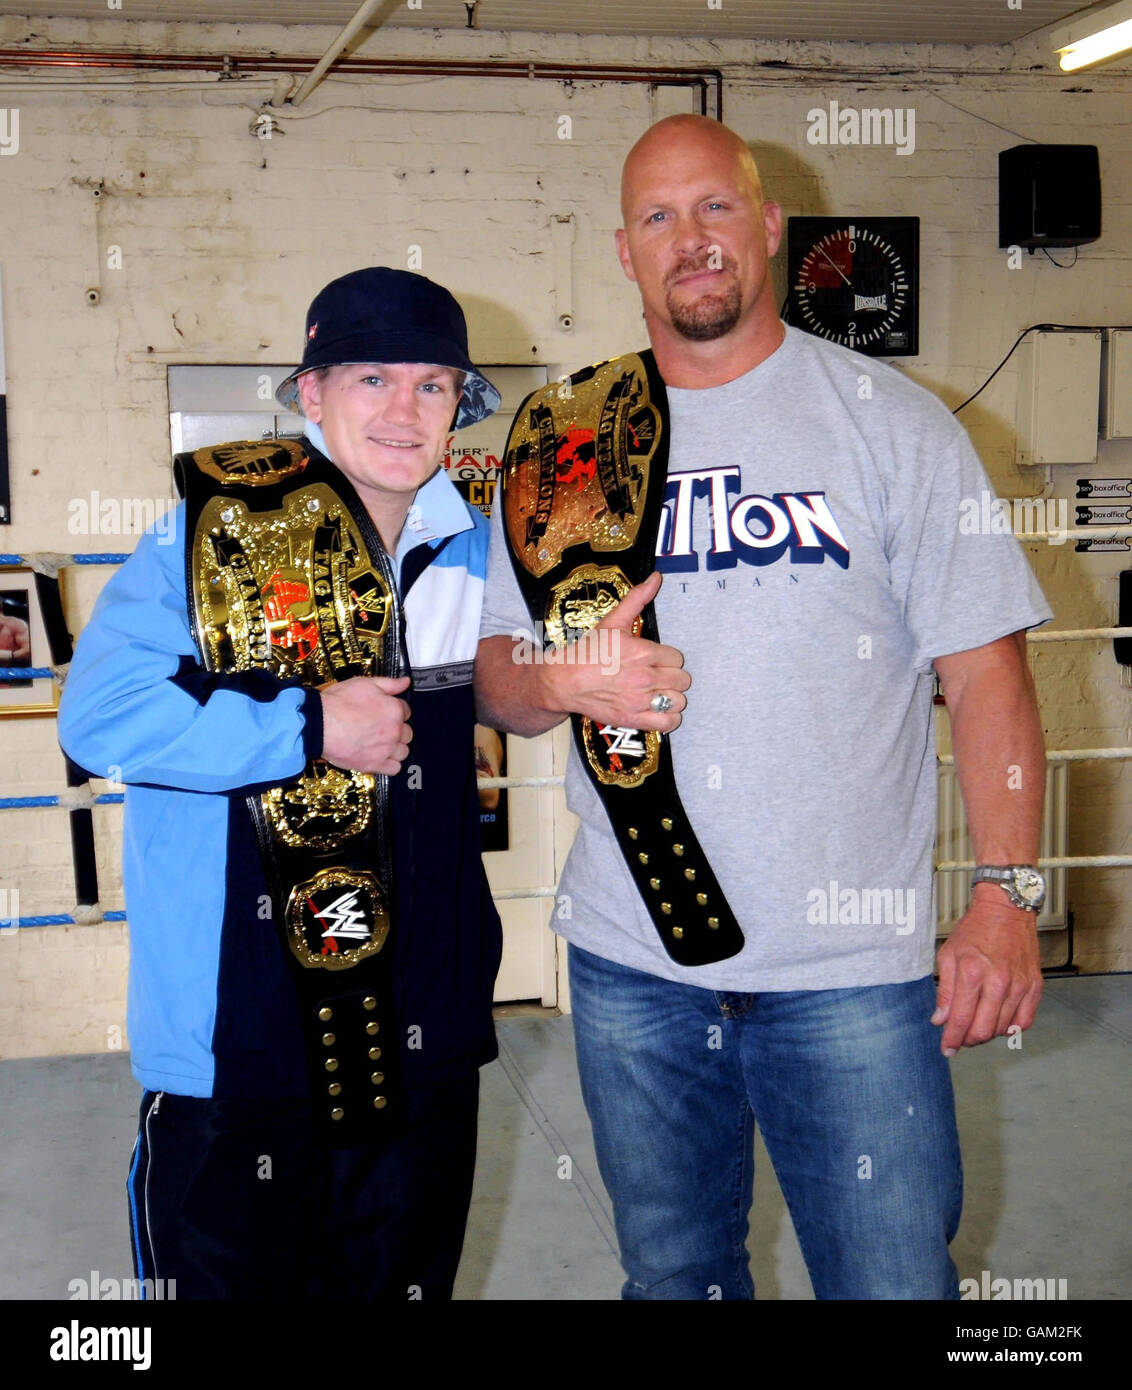 WWE Superstar 'Stone Cold' Steve Austin met with Ricky 'The Hitman Hatton' (left) at Ricky's boxing gym in Denton, Manchester. Stock Photo